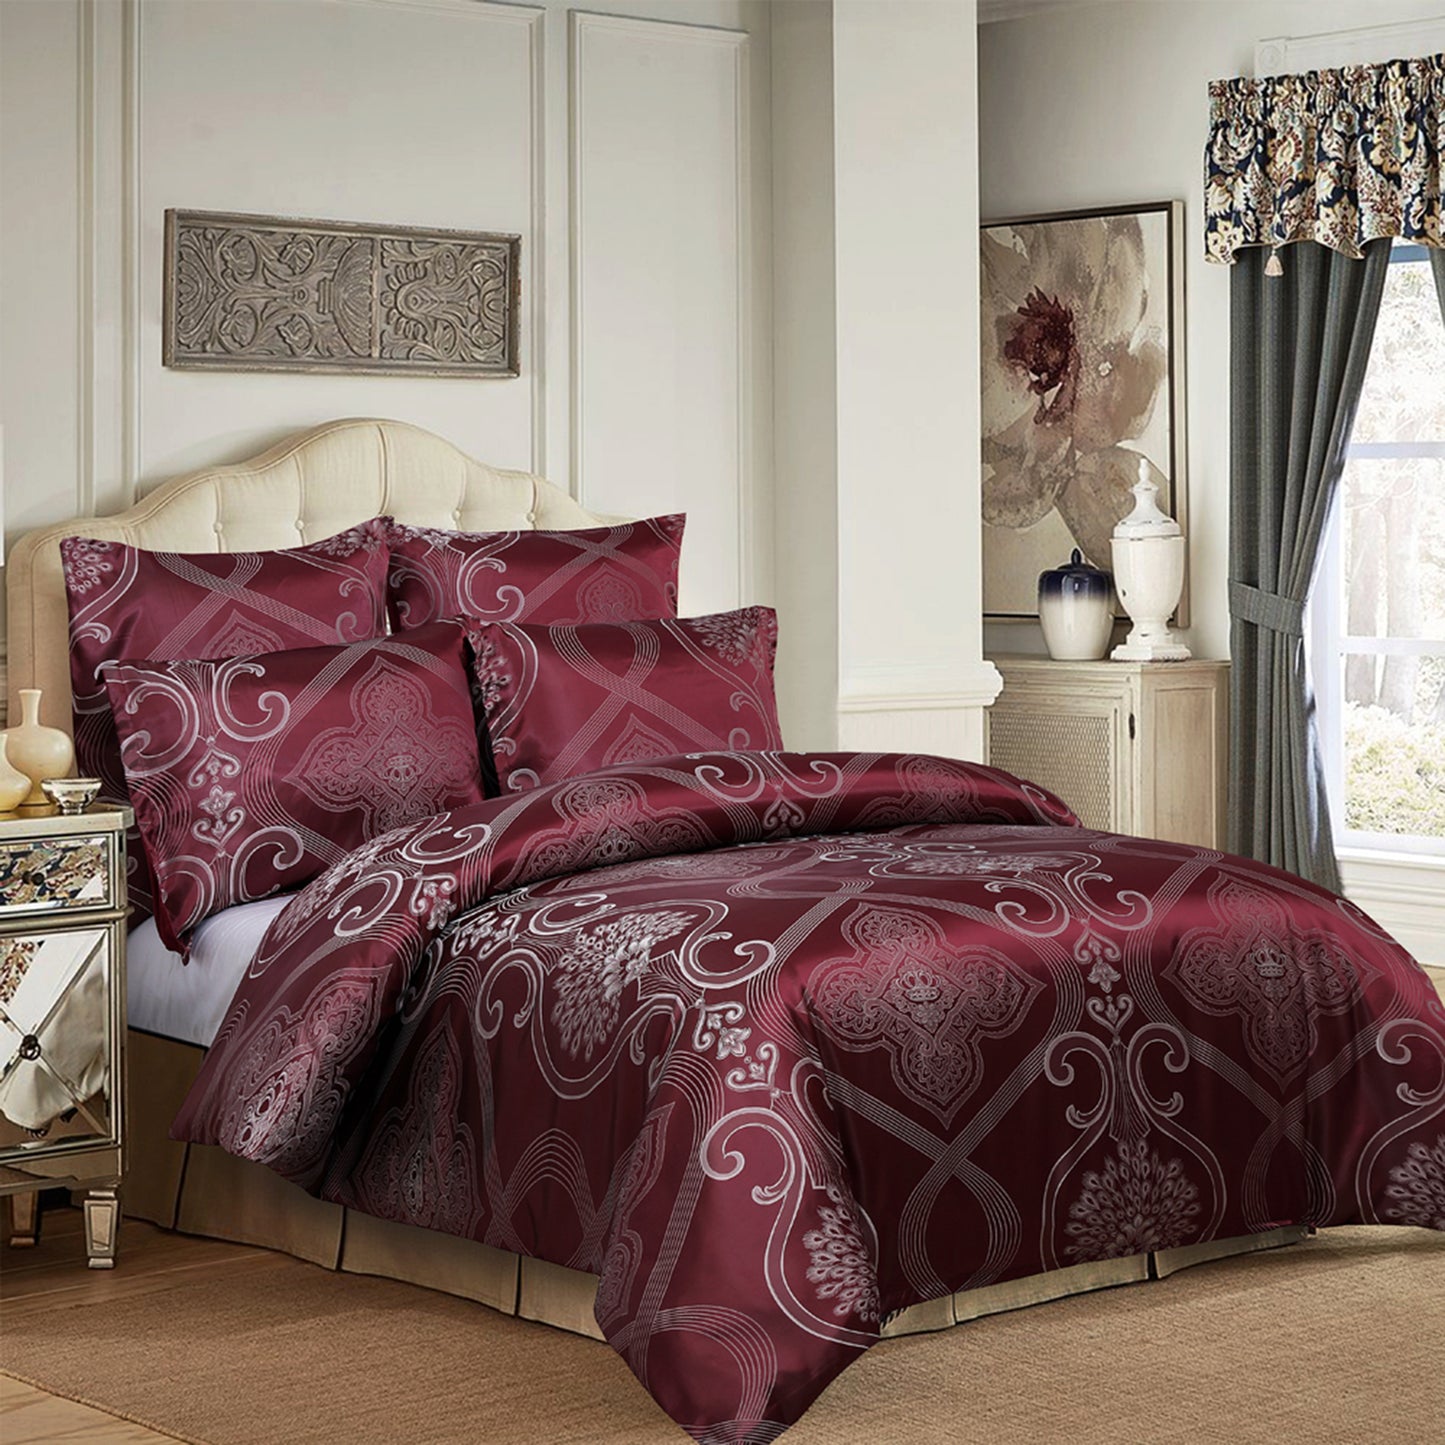 WONGS BEDDING Dark Red Embroidery Satin Craft Duvet Cover Set With 2 Pillow Case